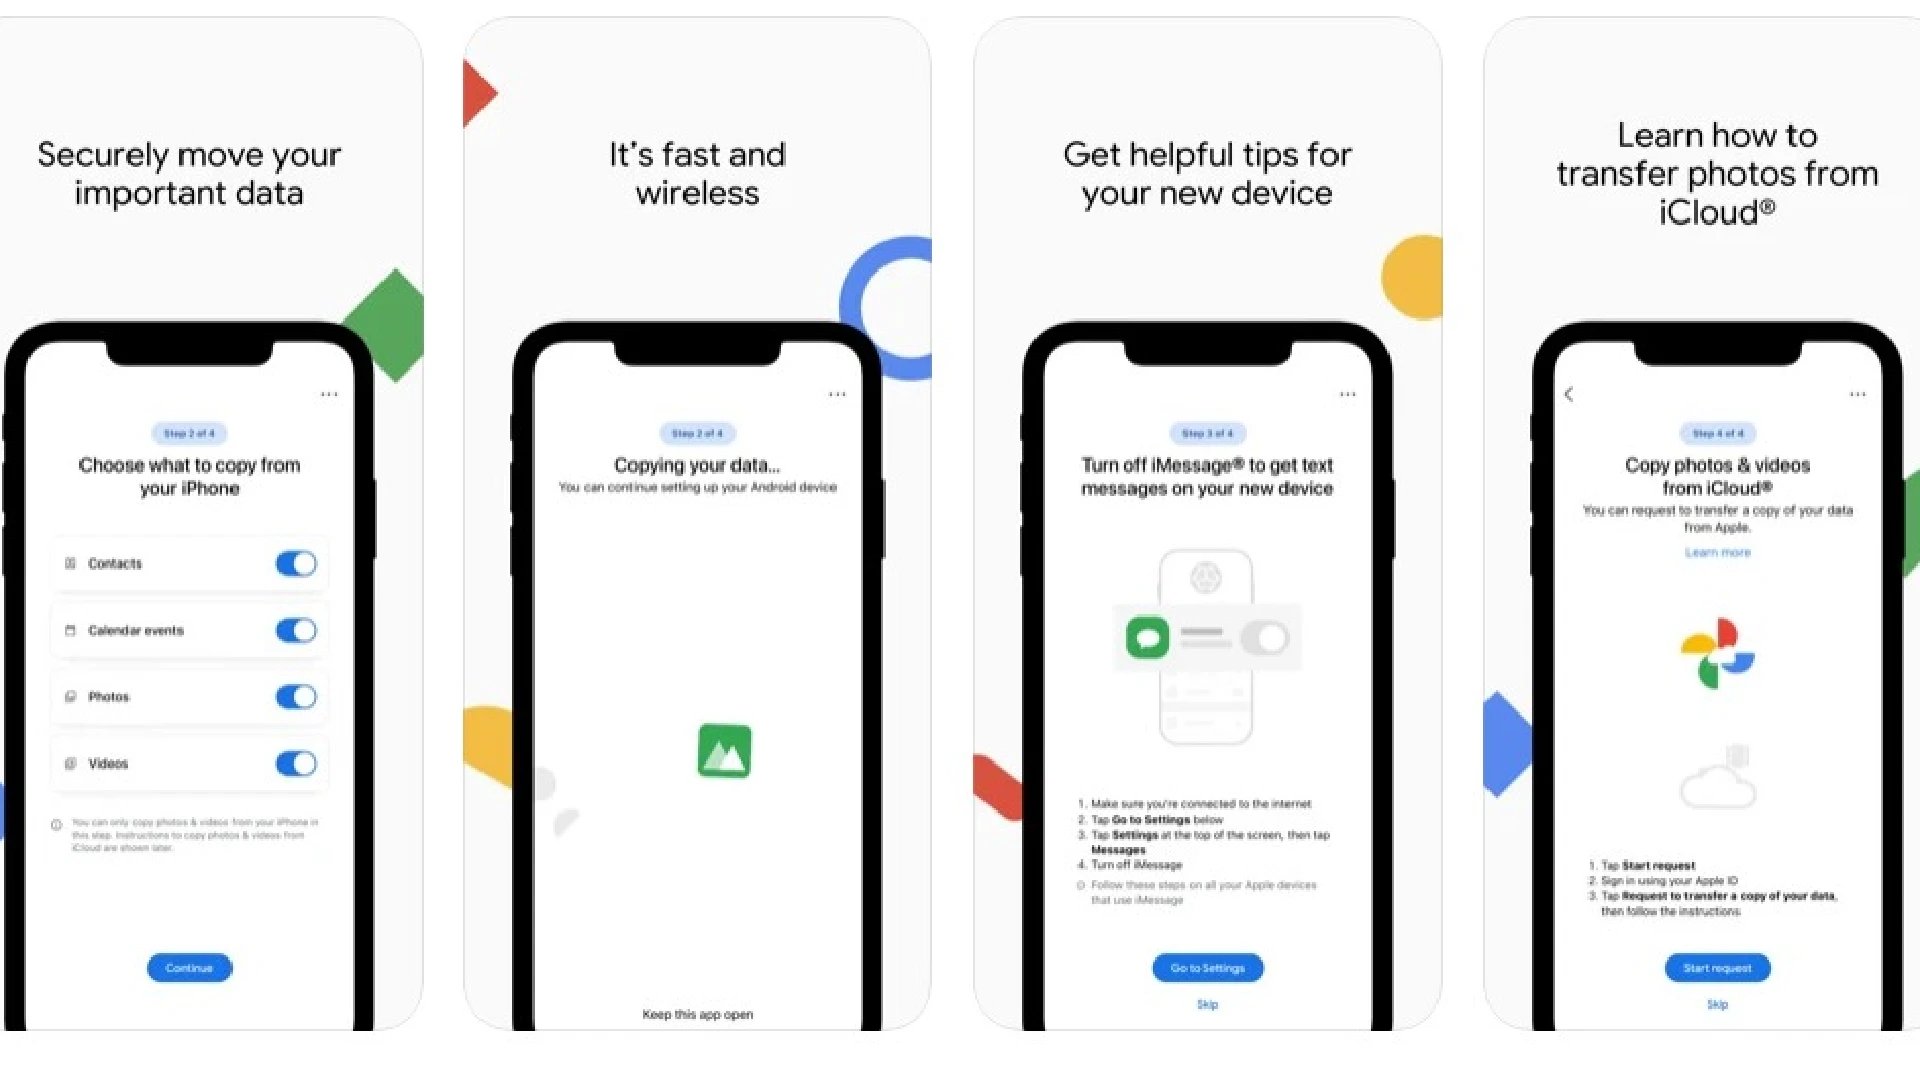 Google discreetly releases its “Switch to Android” app on iOS